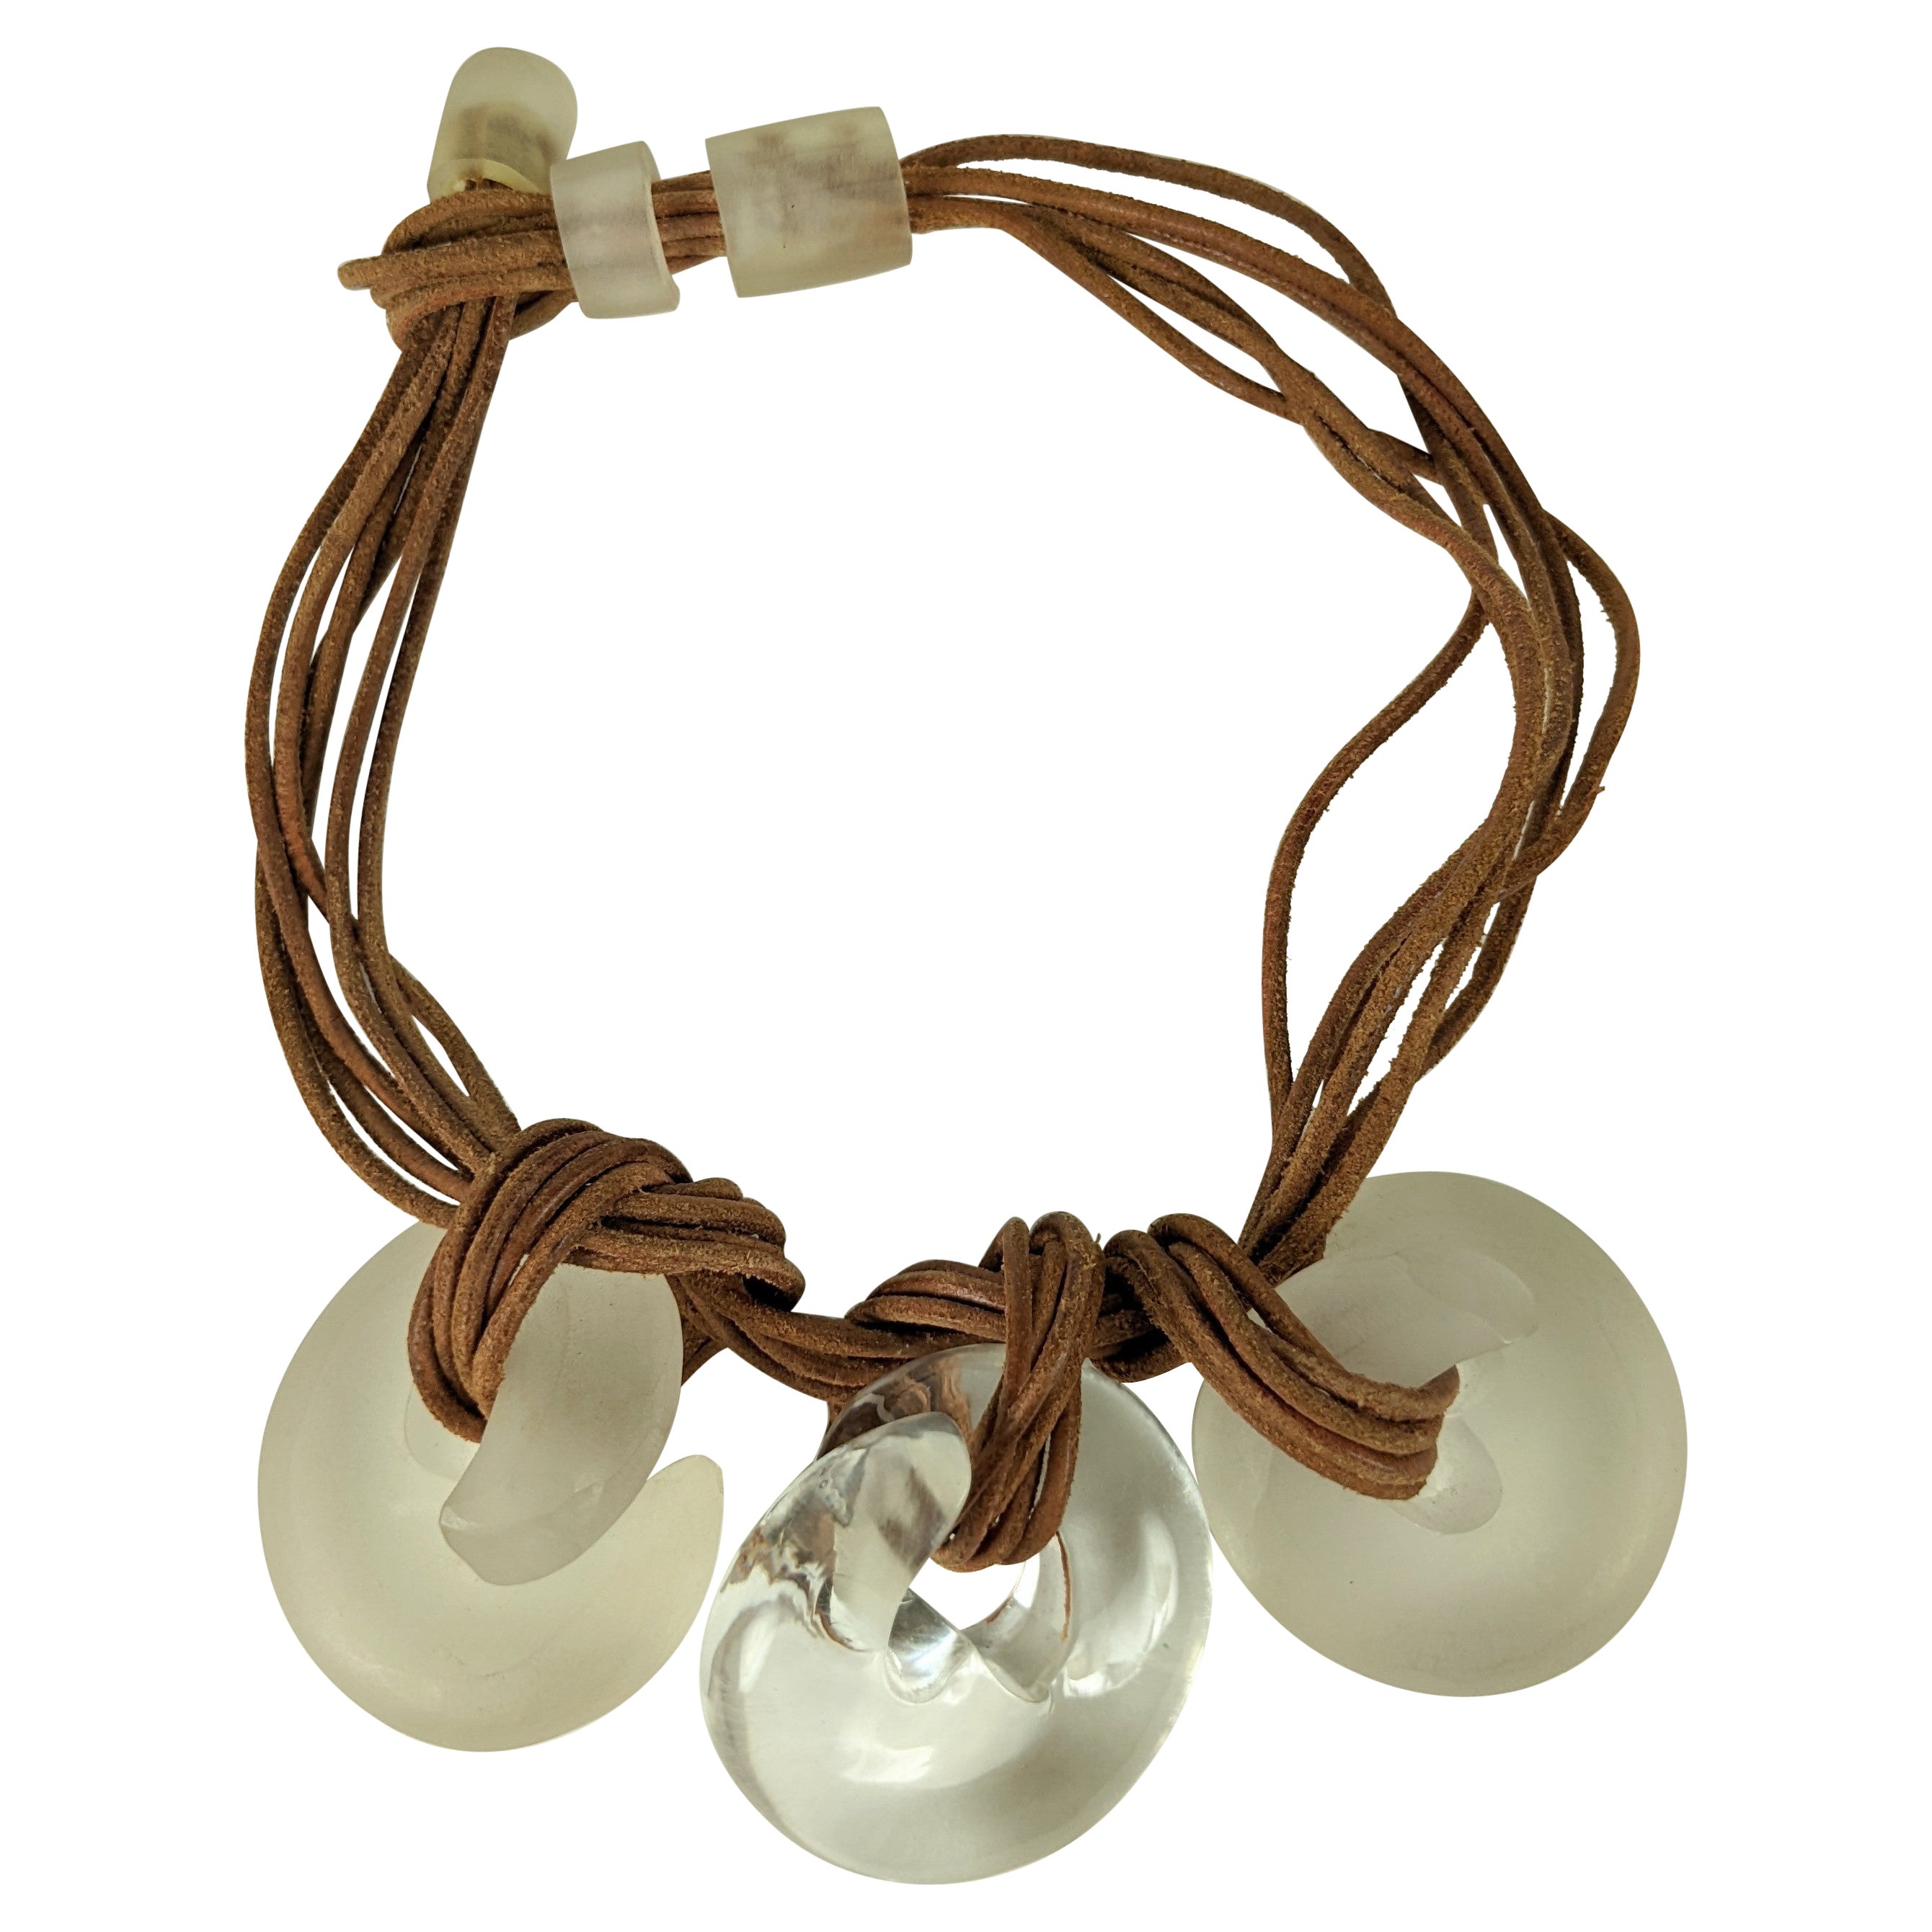 Lucite Coil and Rawhide Pendant Necklace